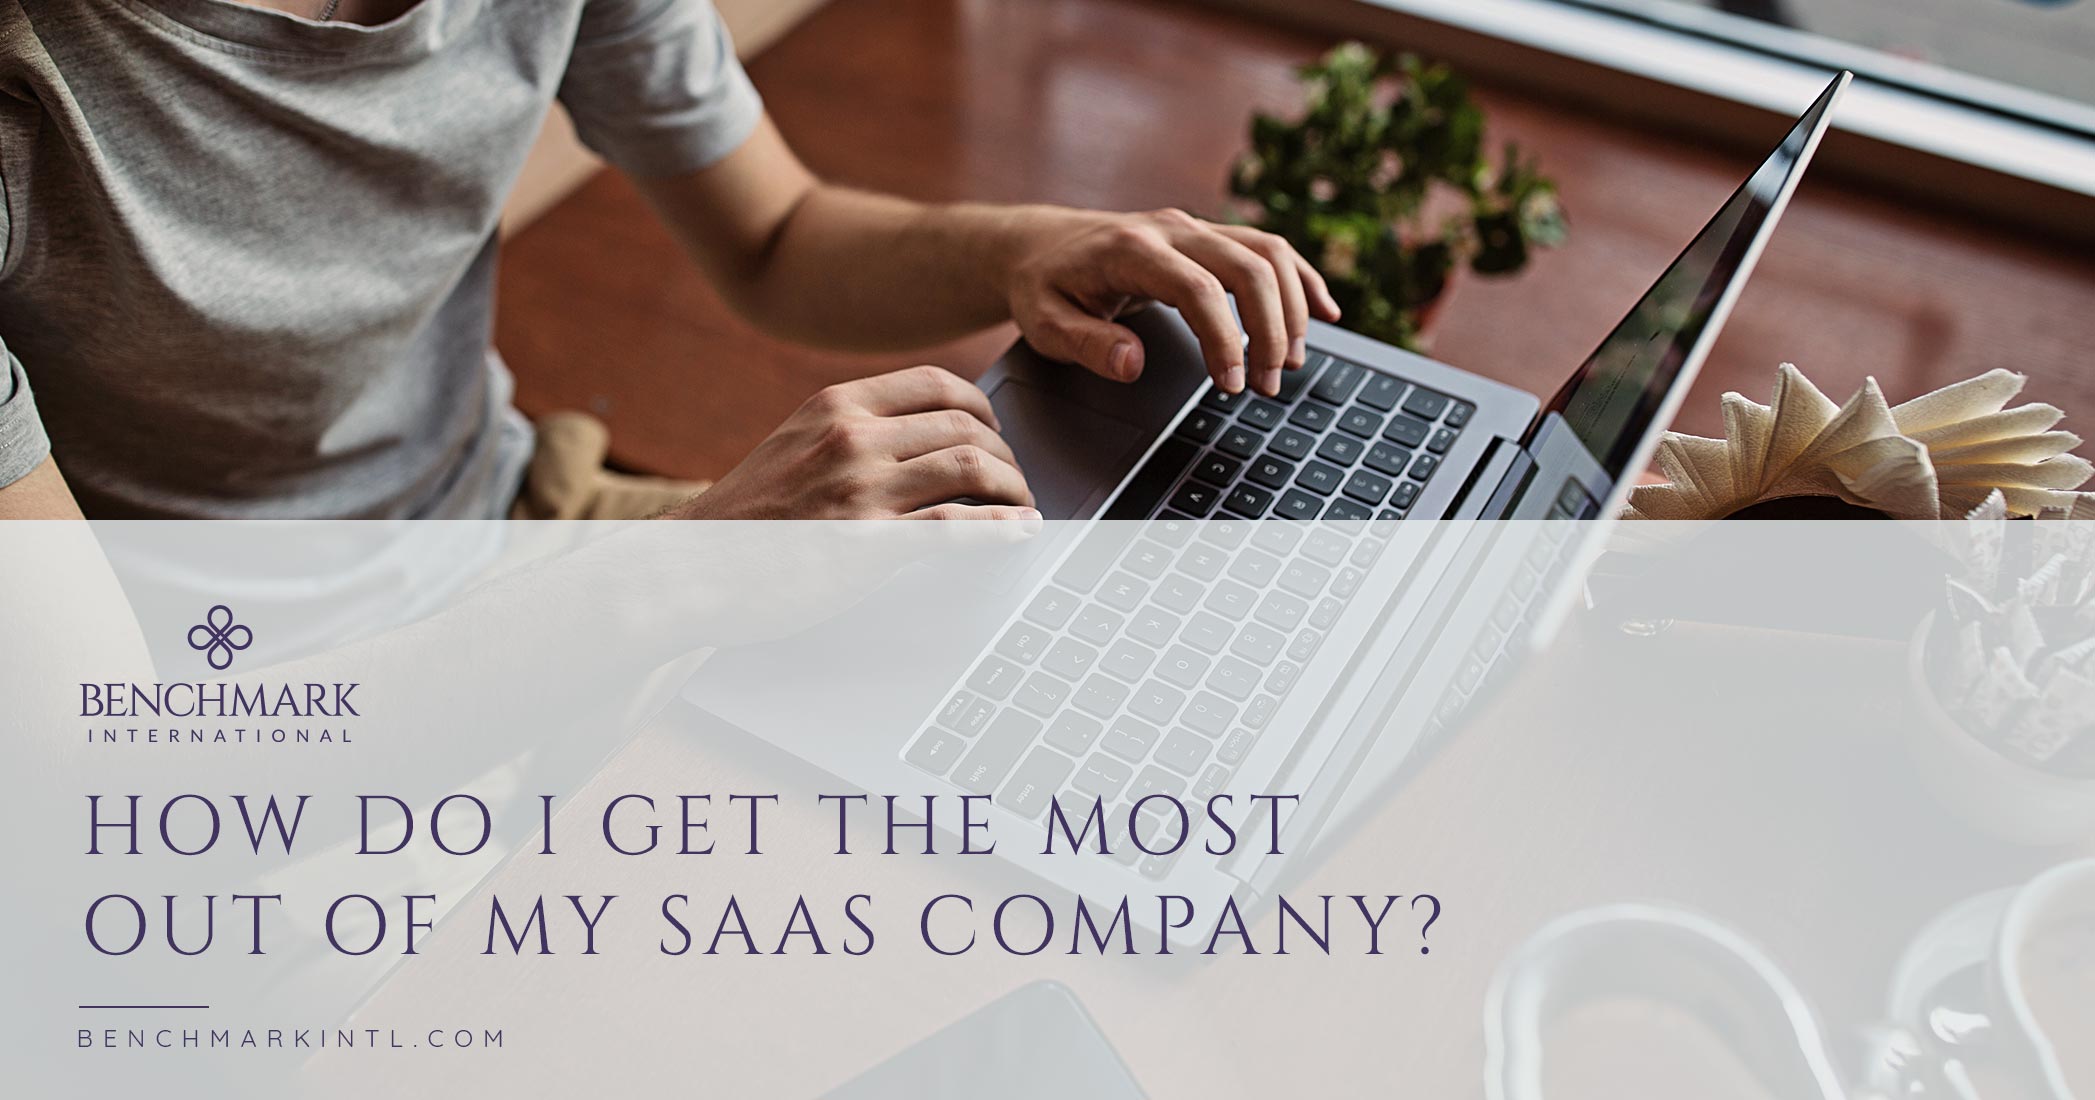 How Do I Get The Most Out Of My SaaS Company?